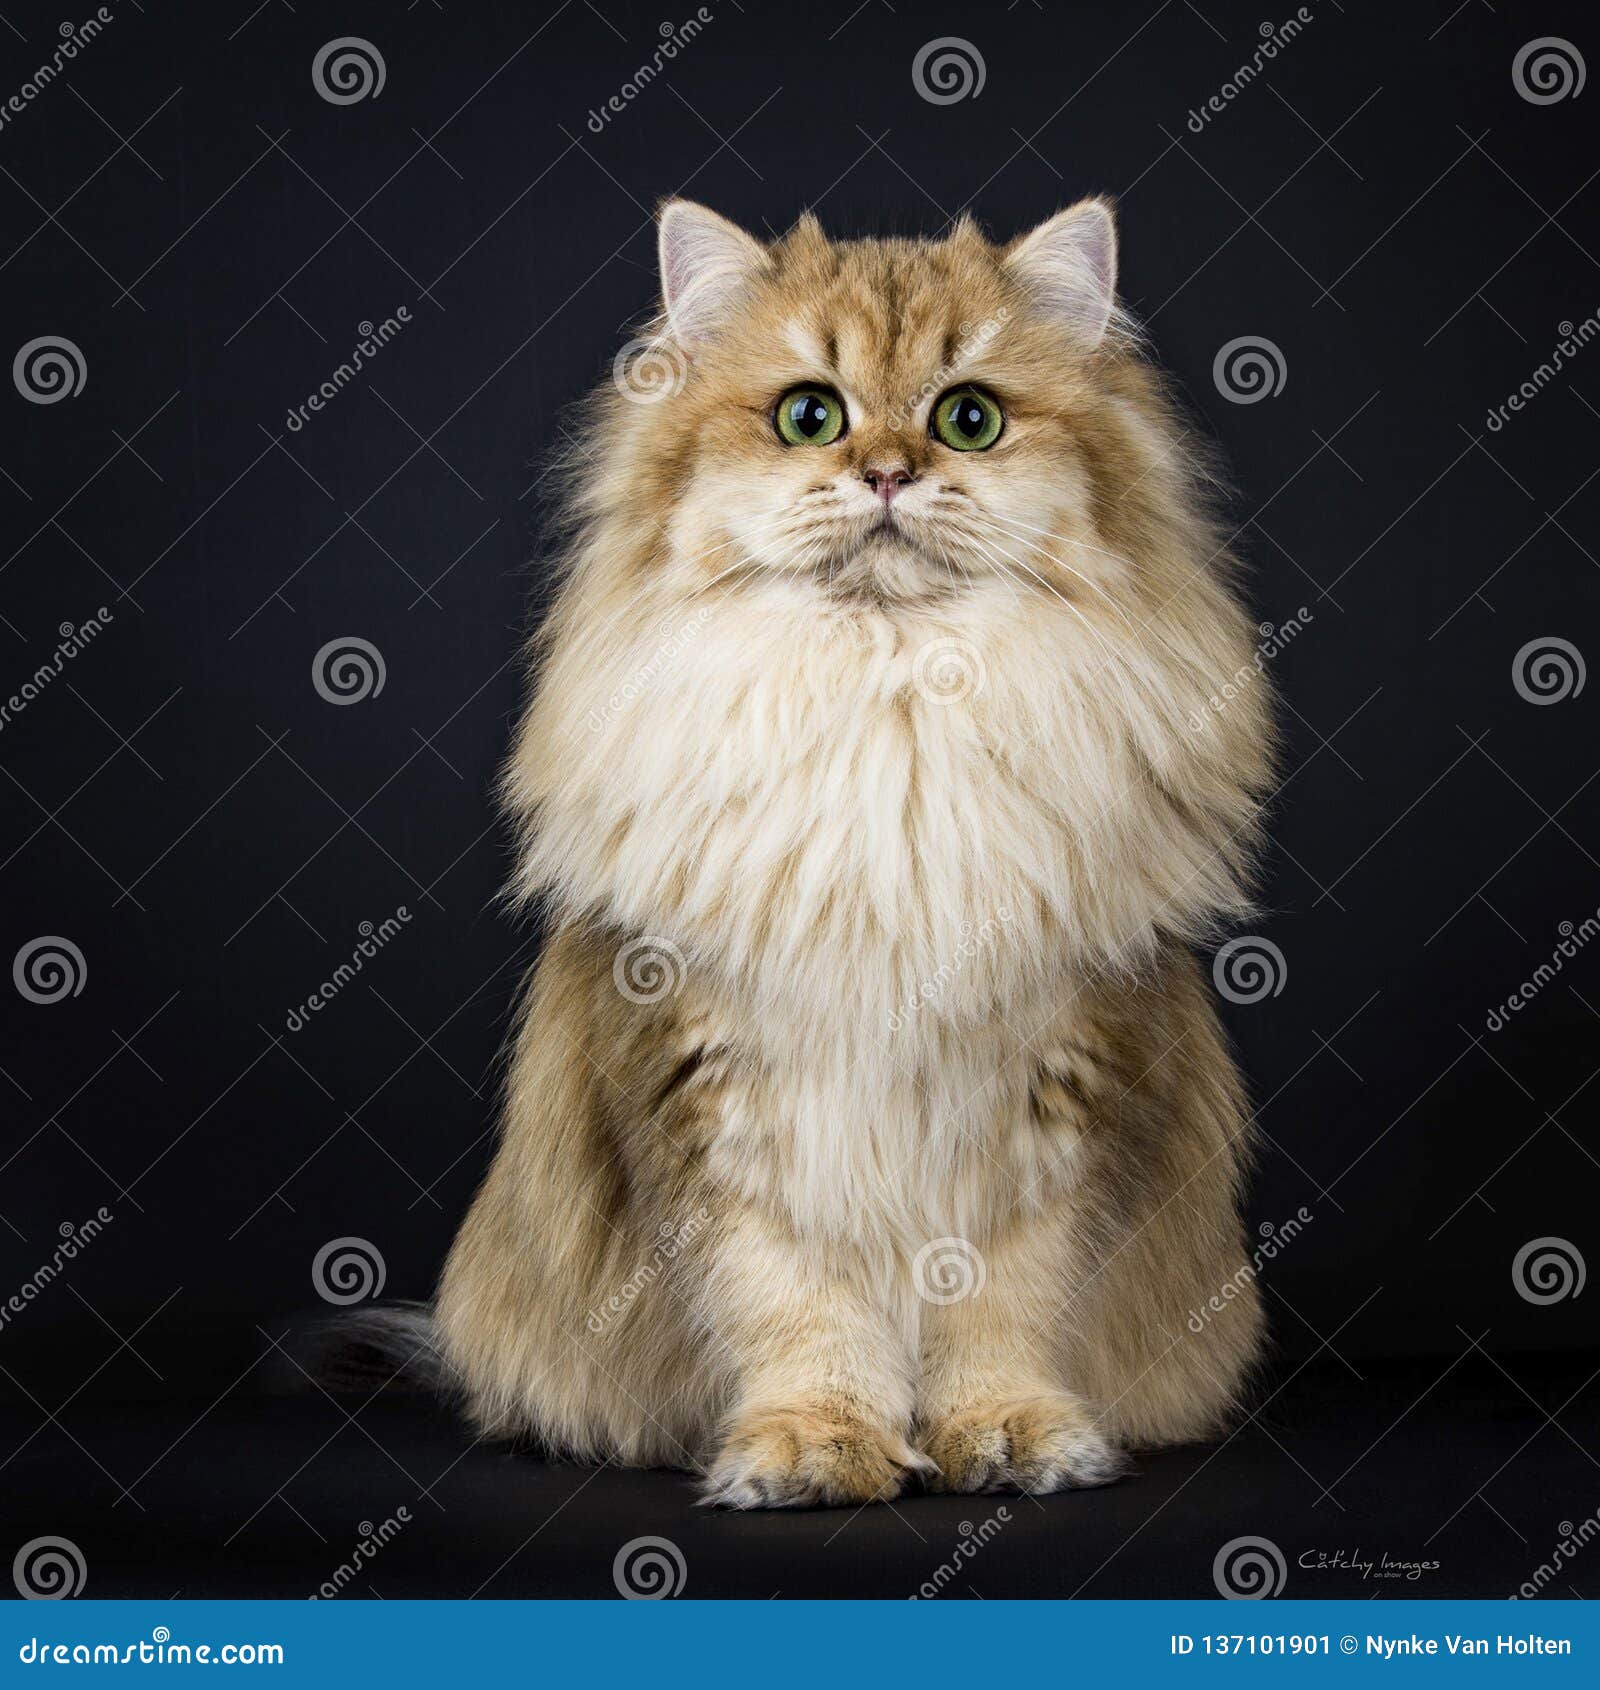 Amazing Full Coated Fluffy Golden British Longhair Cat Kitten,Isolated on  Black Background. Stock Image - Image of excellent, look: 137101901